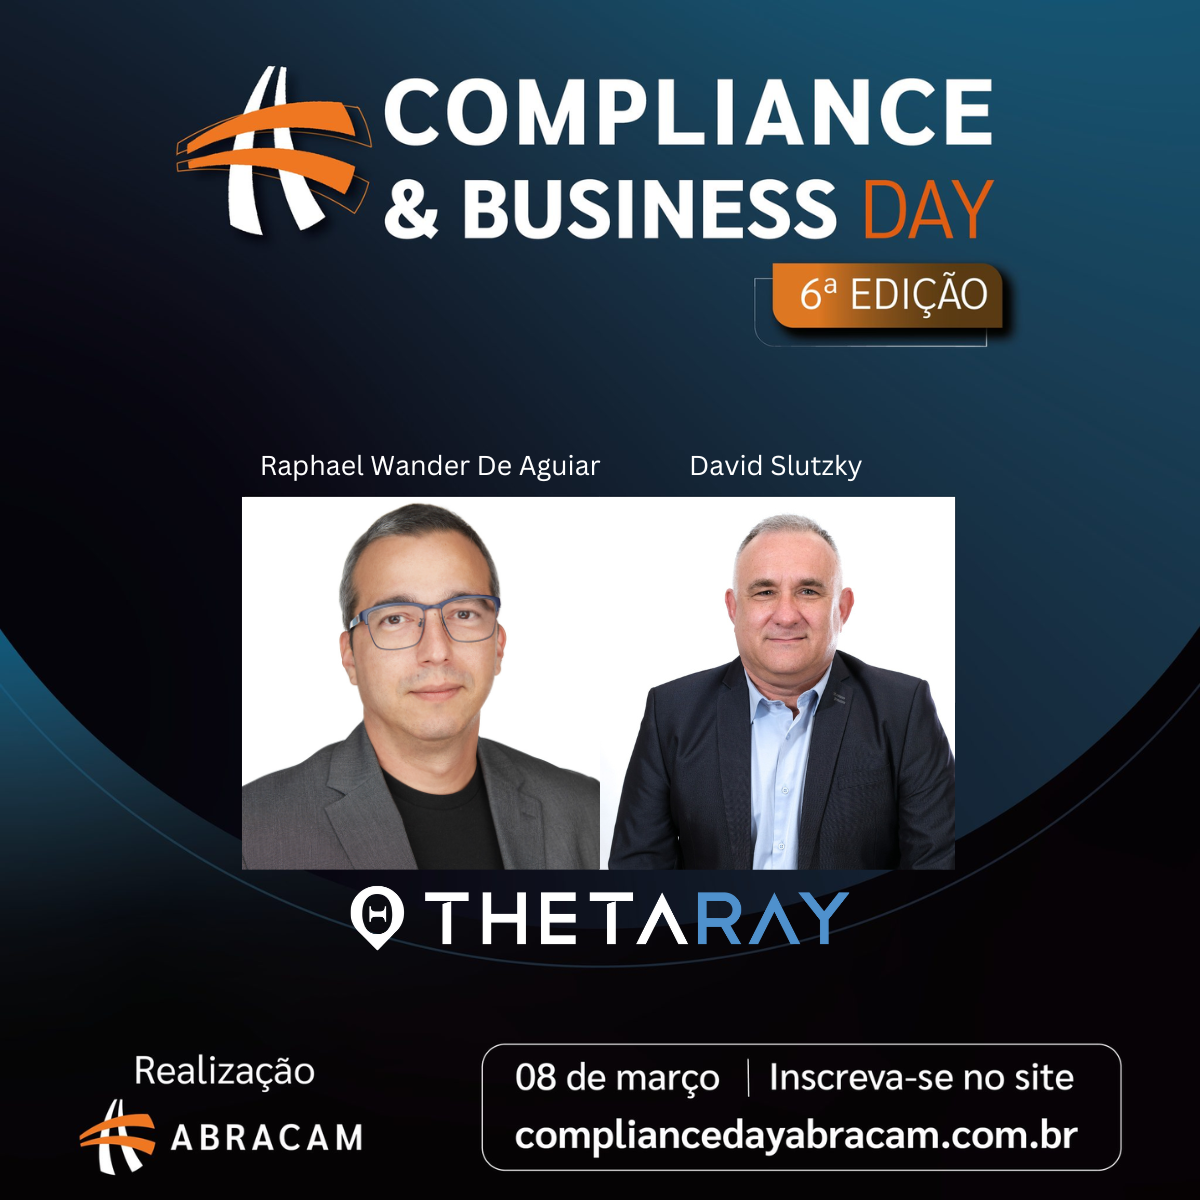 Compliance & Business Day